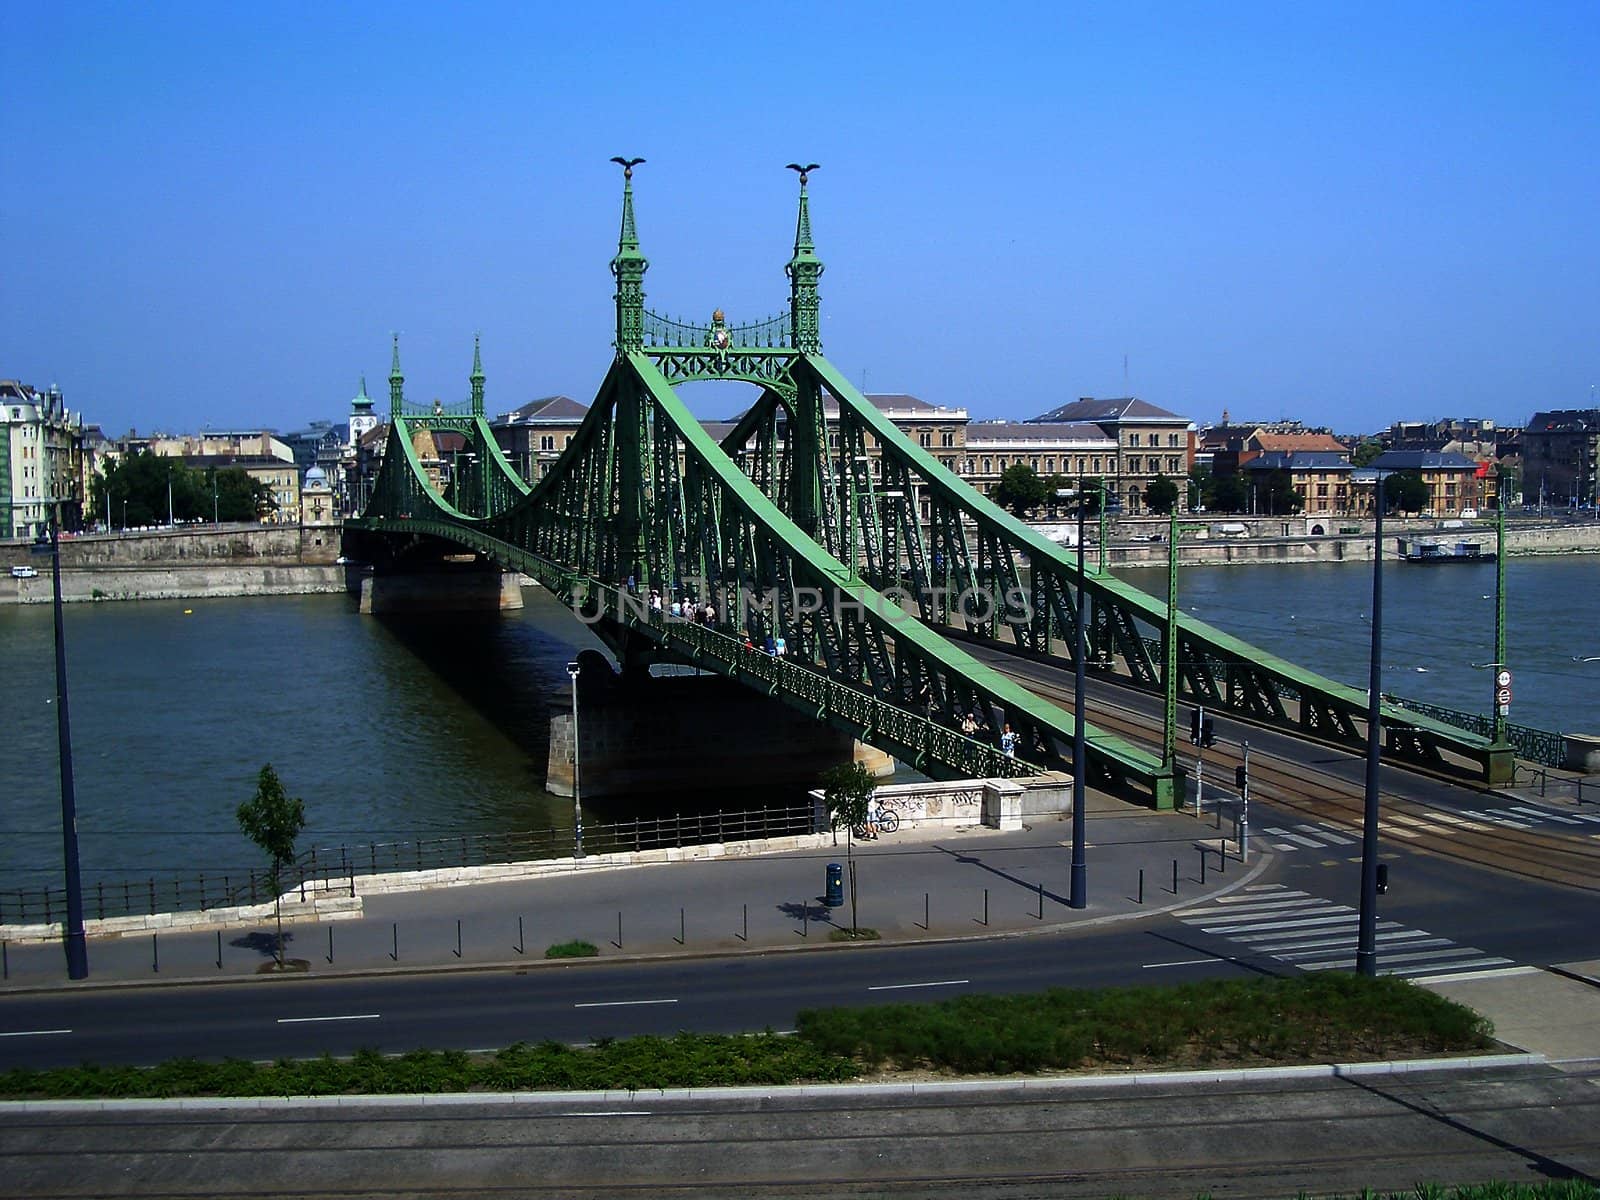 Indipendence Bridge over the Danube River, Budapest, Hungary